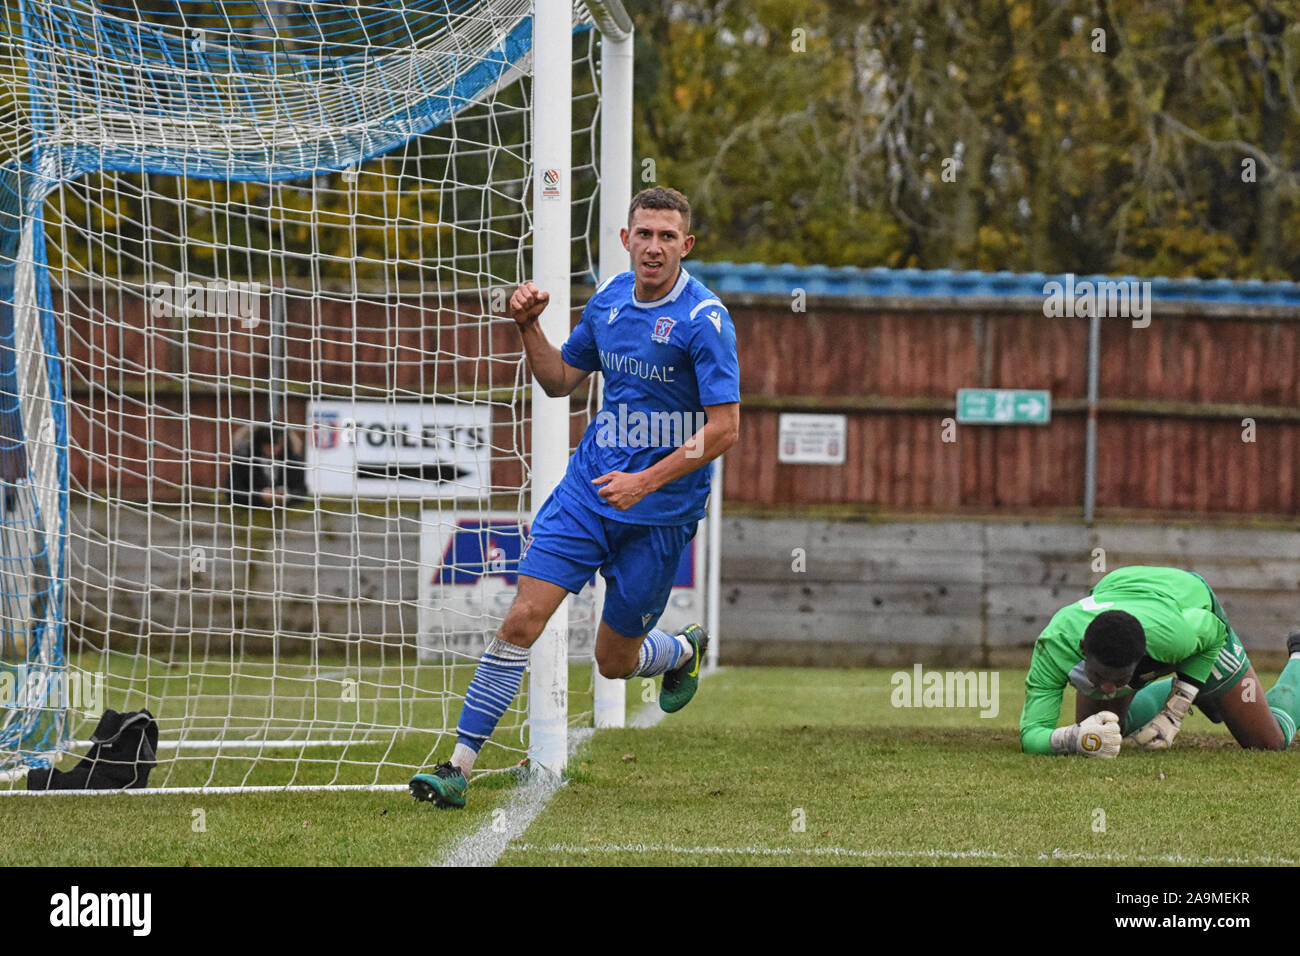 Swindon Supermarine Fc Wilts UK 16th Nov 2019 Harry Williams scores the opening goal on the 28th minute against Hendon Fc final score 2-0 Supermarine Stock Photo